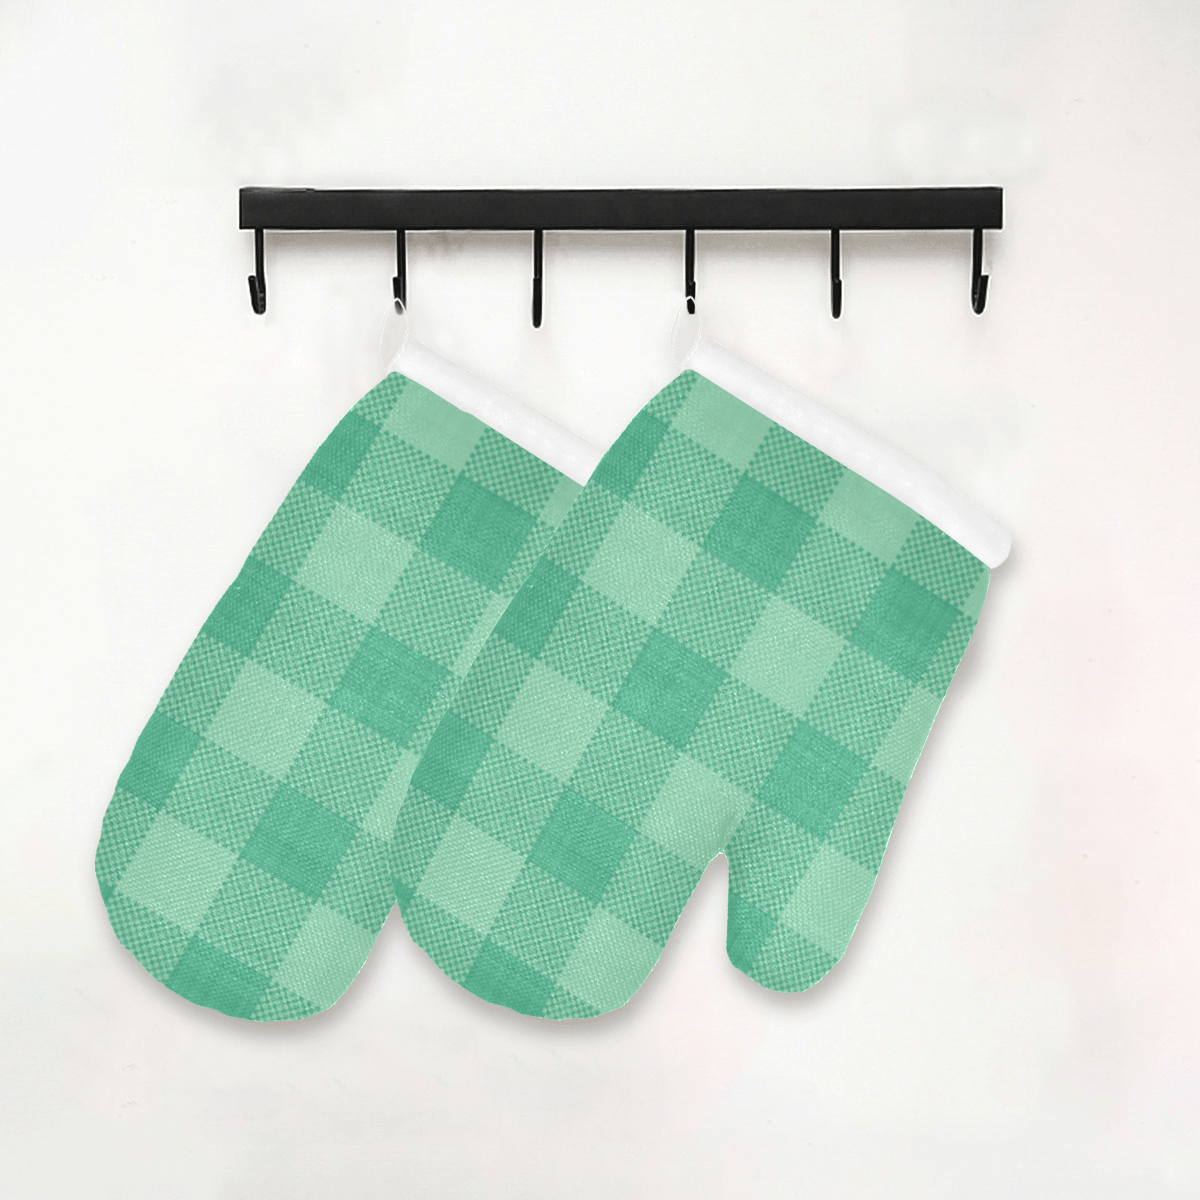 Mint Green Plaid Oven Mitt (Two Pieces)